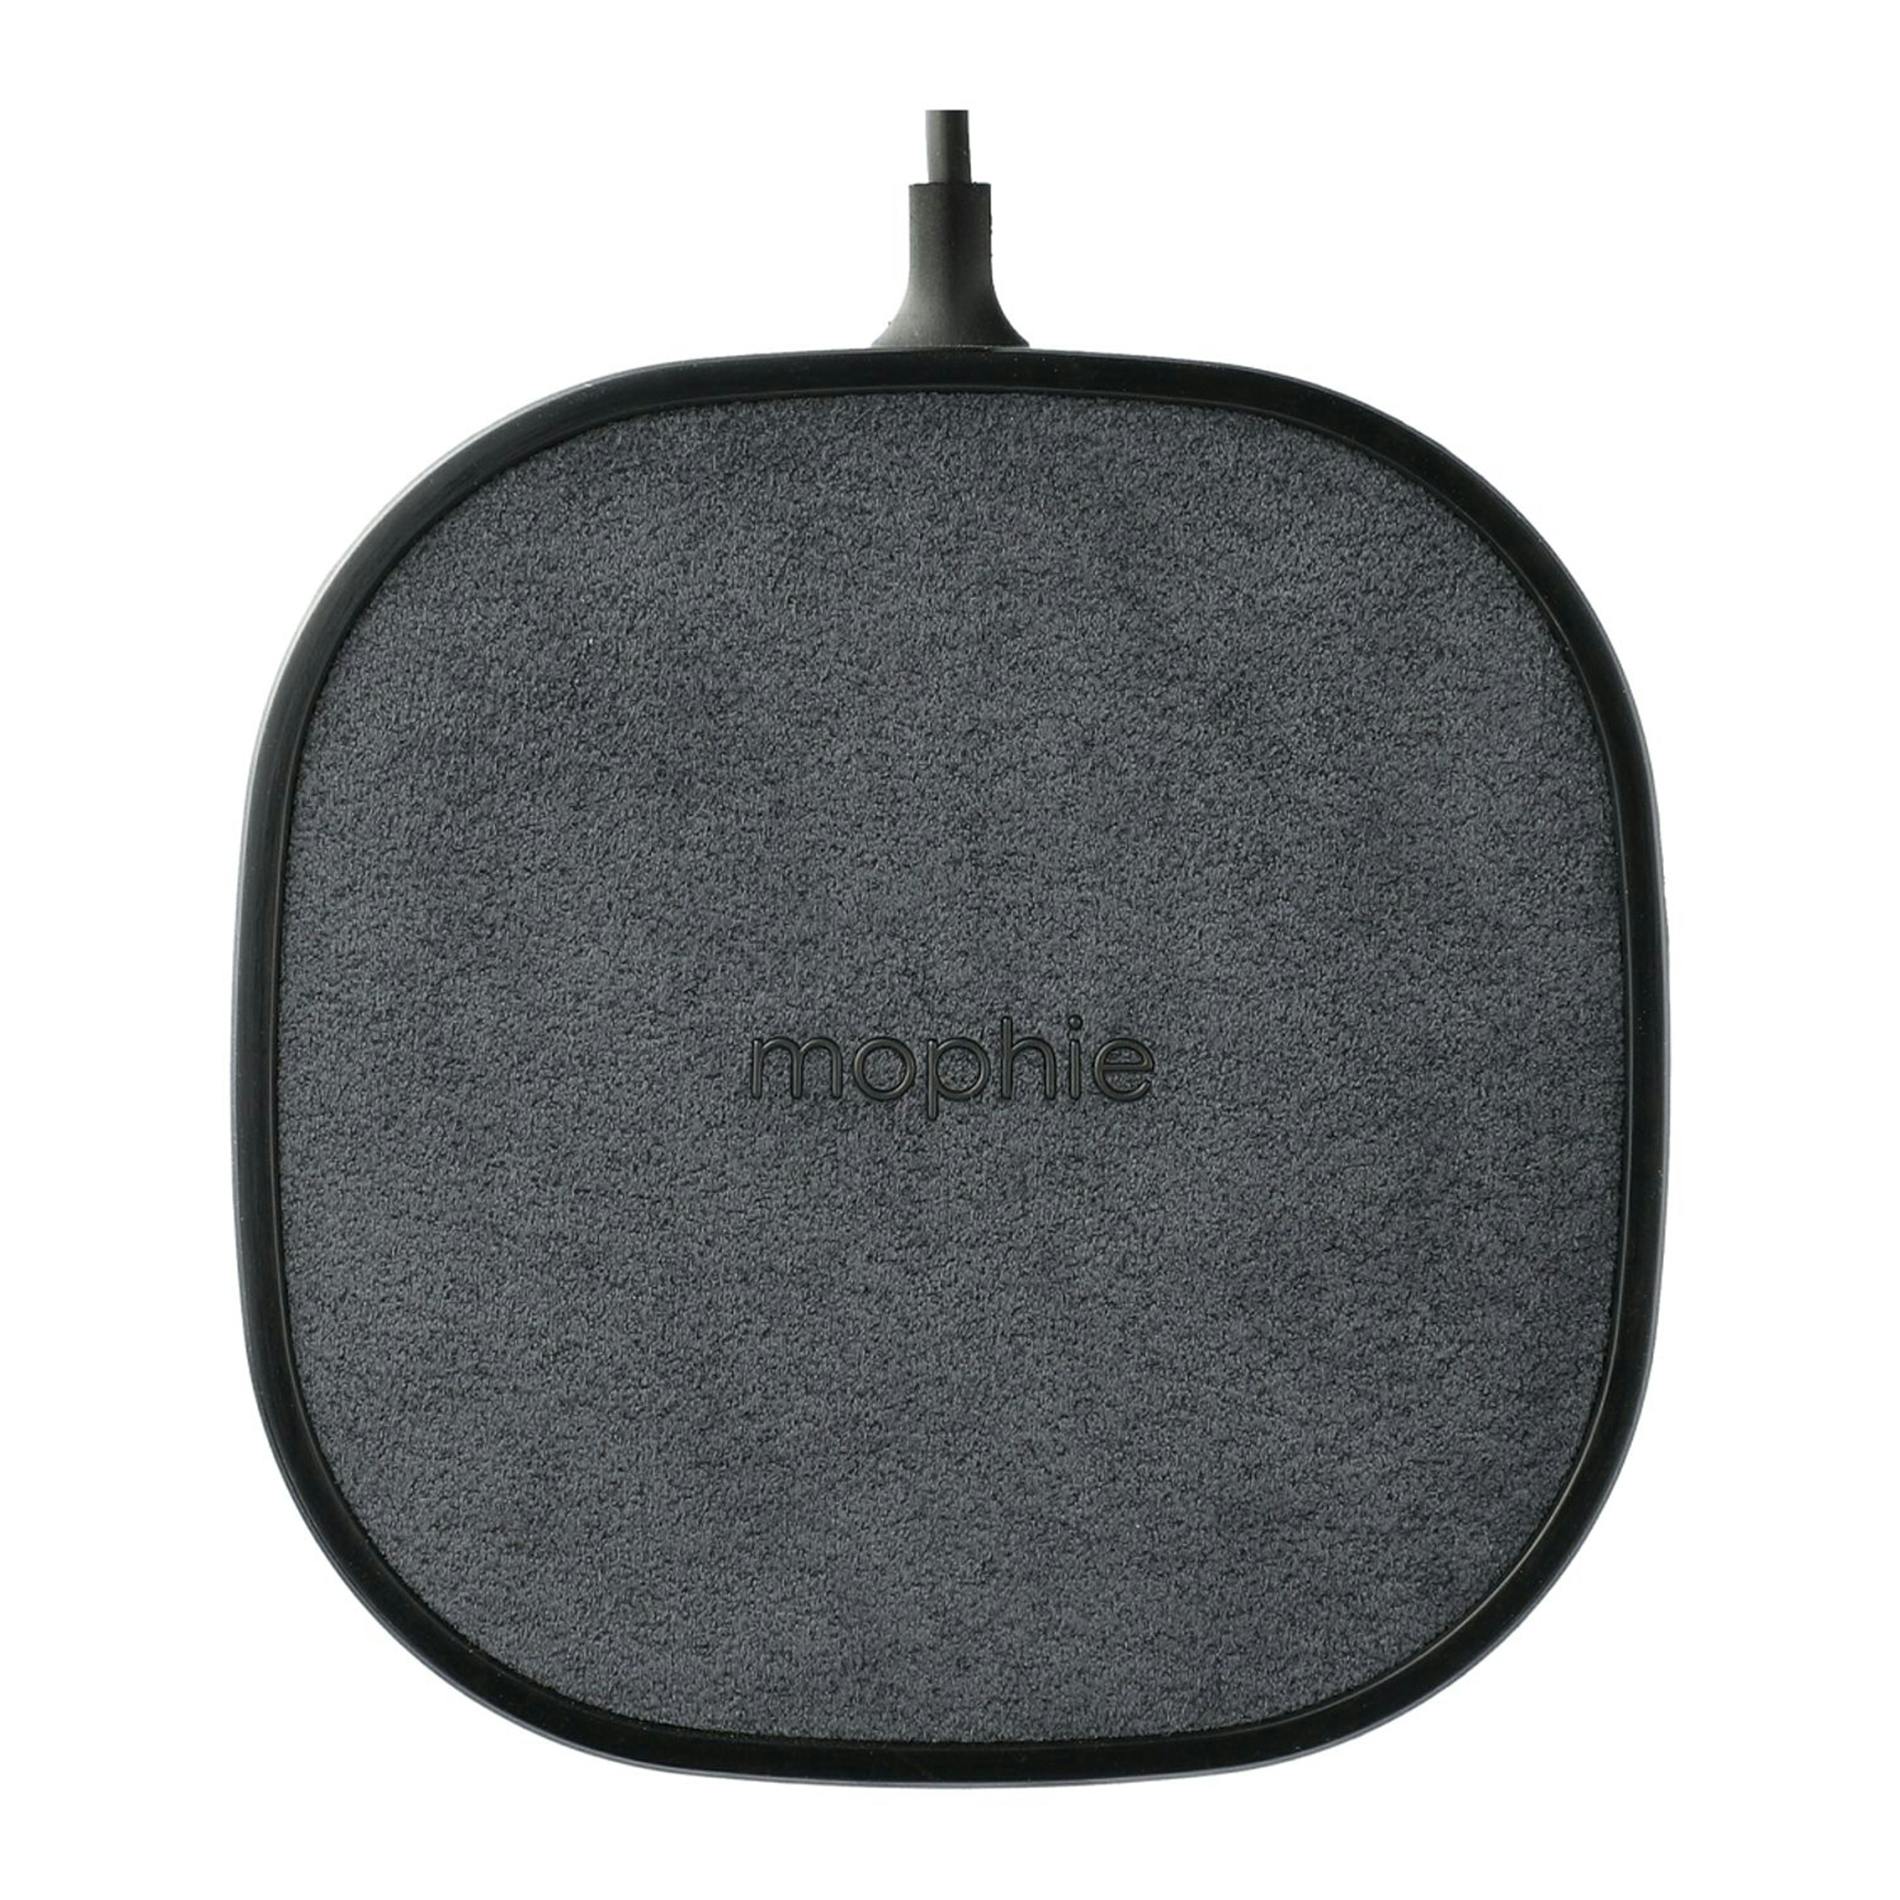 mophie® 15W Wireless Charging Pad - additional Image 3